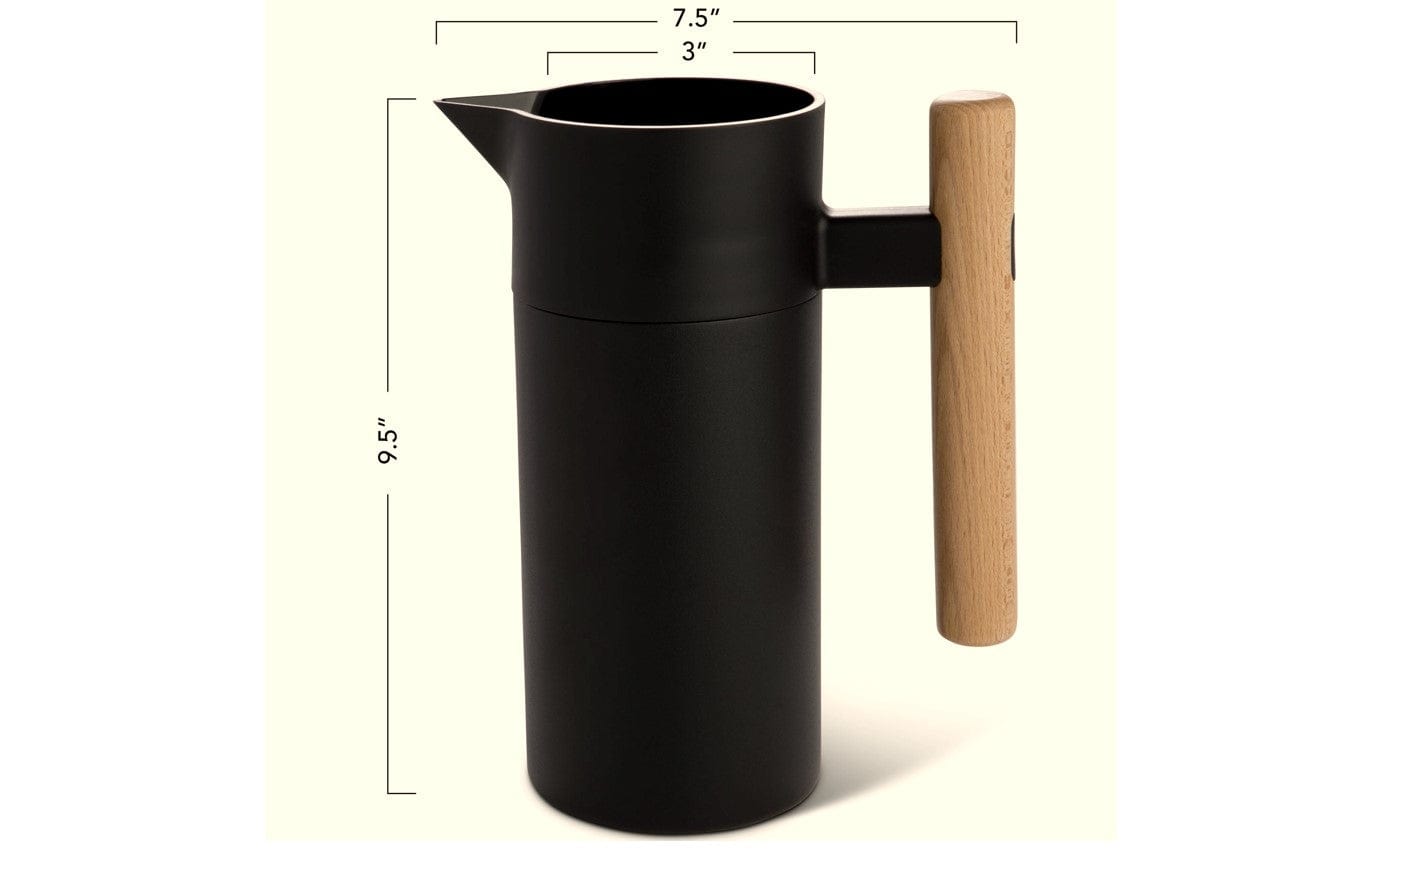 HASTINGS MYSA THERMAL CARAFE DOUBLE WALL STAINLESS STEEL 1.2L BLACK WITH GERMAN BEECHWOOD HANDLE - HCMYSABLK